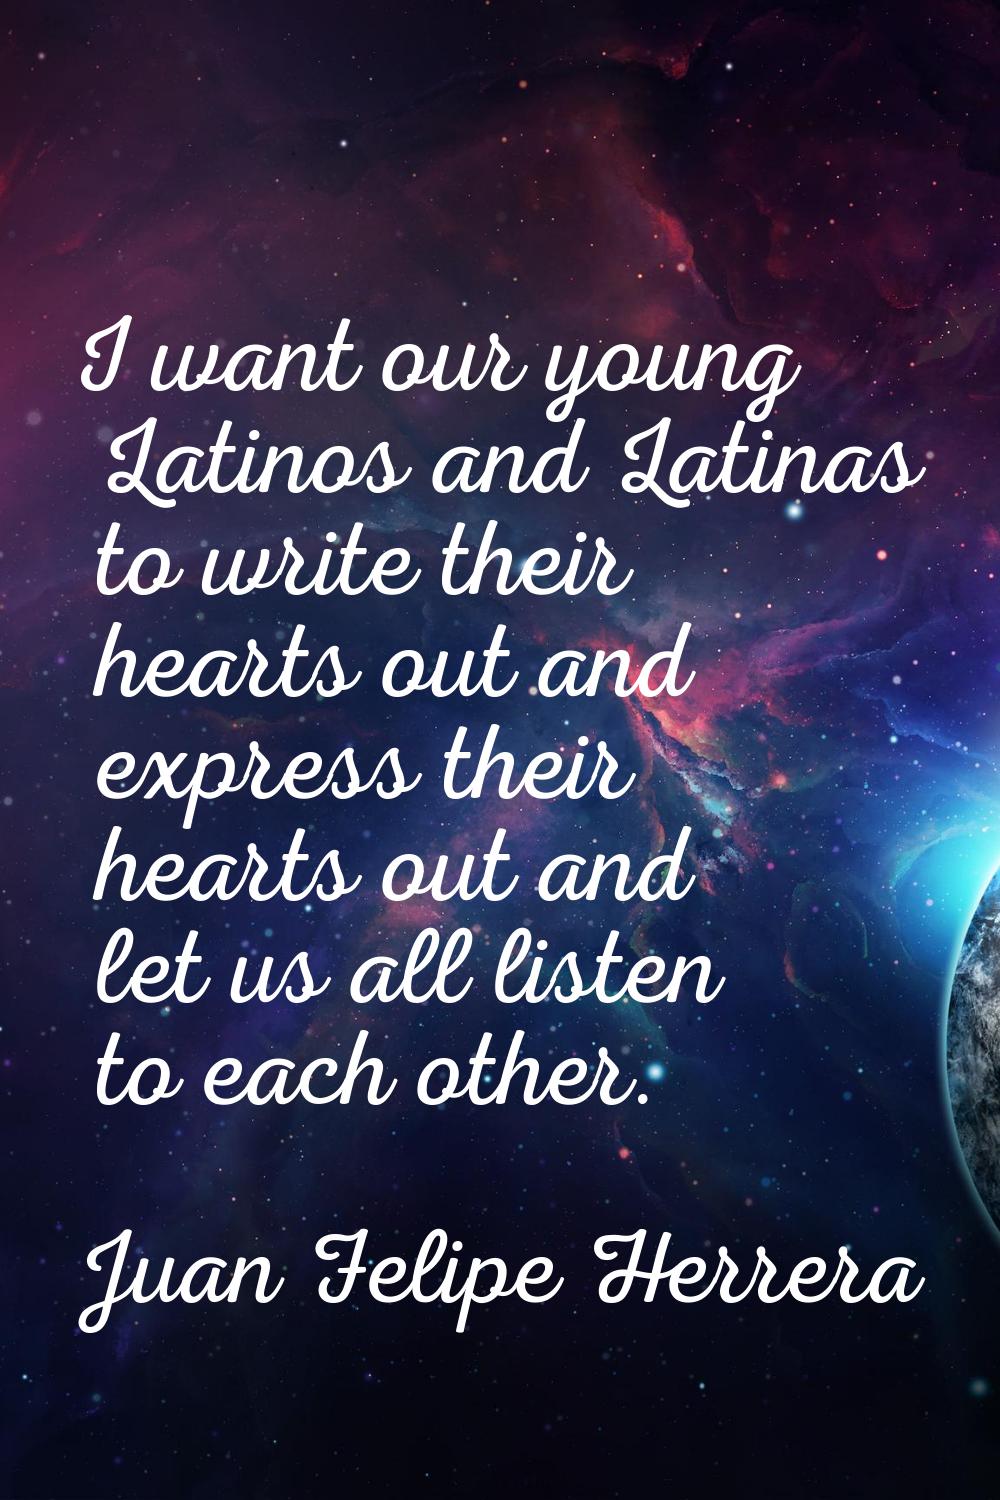 I want our young Latinos and Latinas to write their hearts out and express their hearts out and let